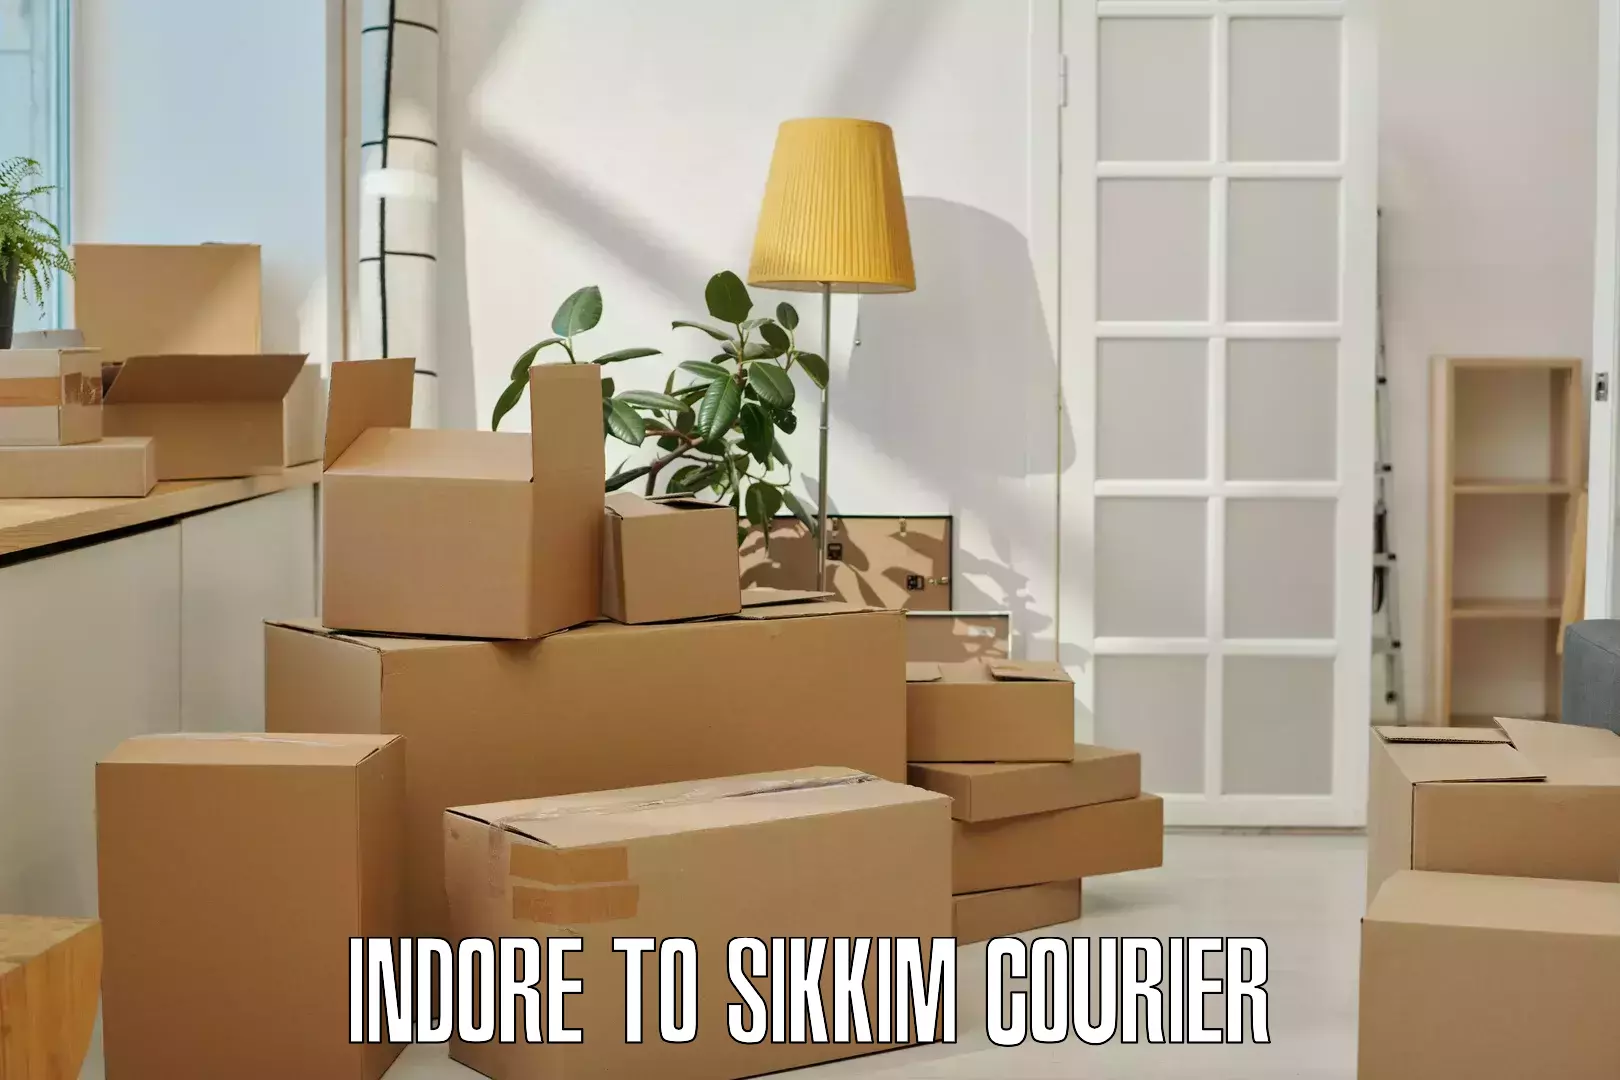 Advanced delivery network Indore to Sikkim